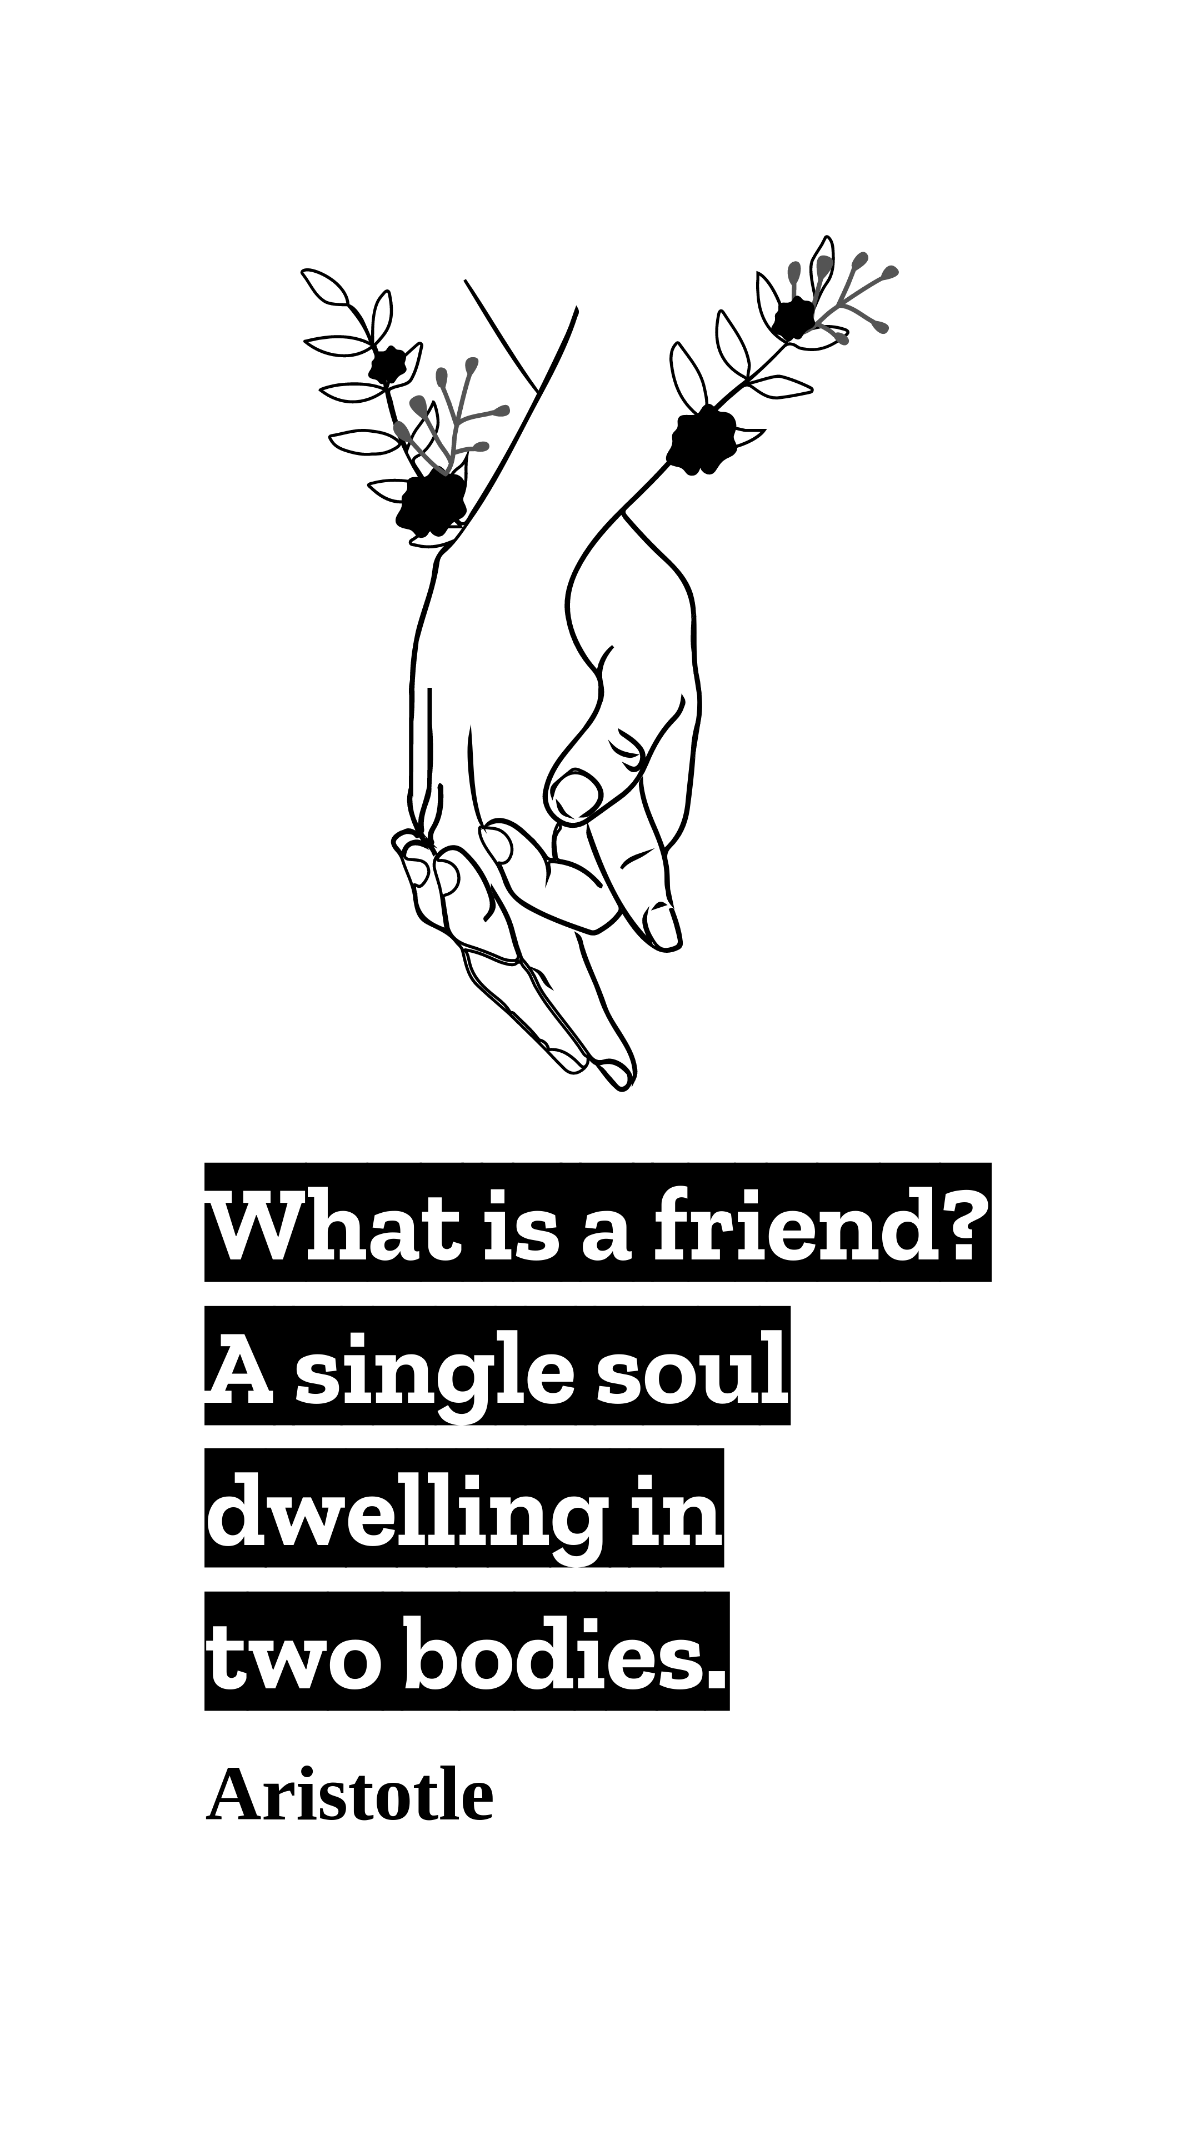 Aristotle - What is a friend? A single soul dwelling in two bodies. Template